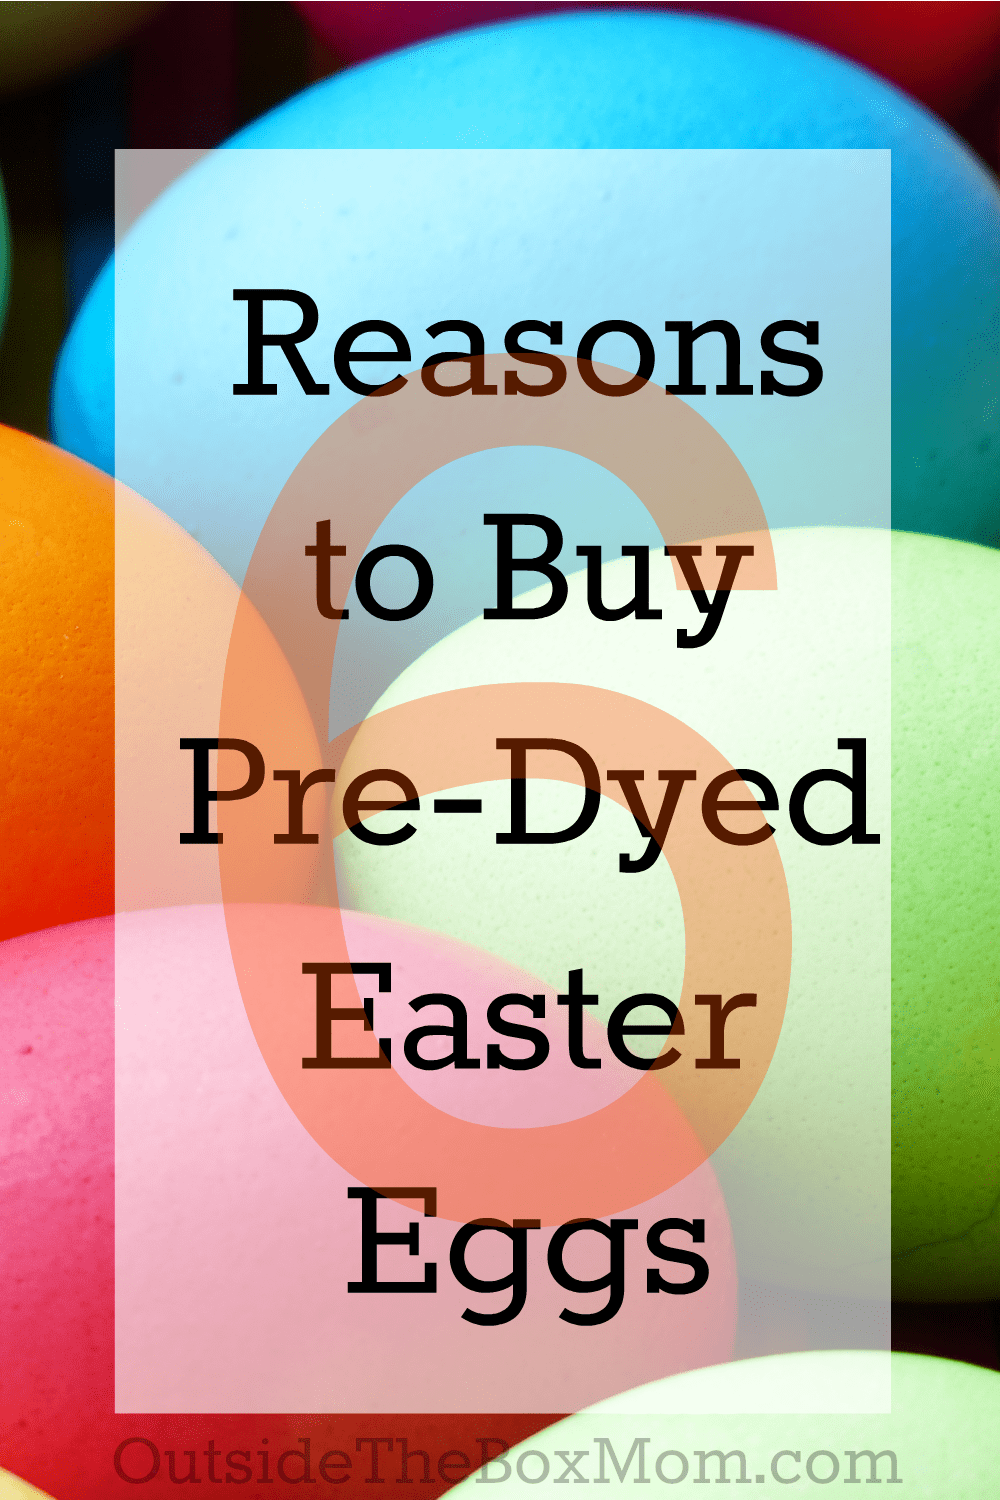 # Reasons You Might Buy Pre-Dyed Easter Eggs | Outsidetheboxmom.com